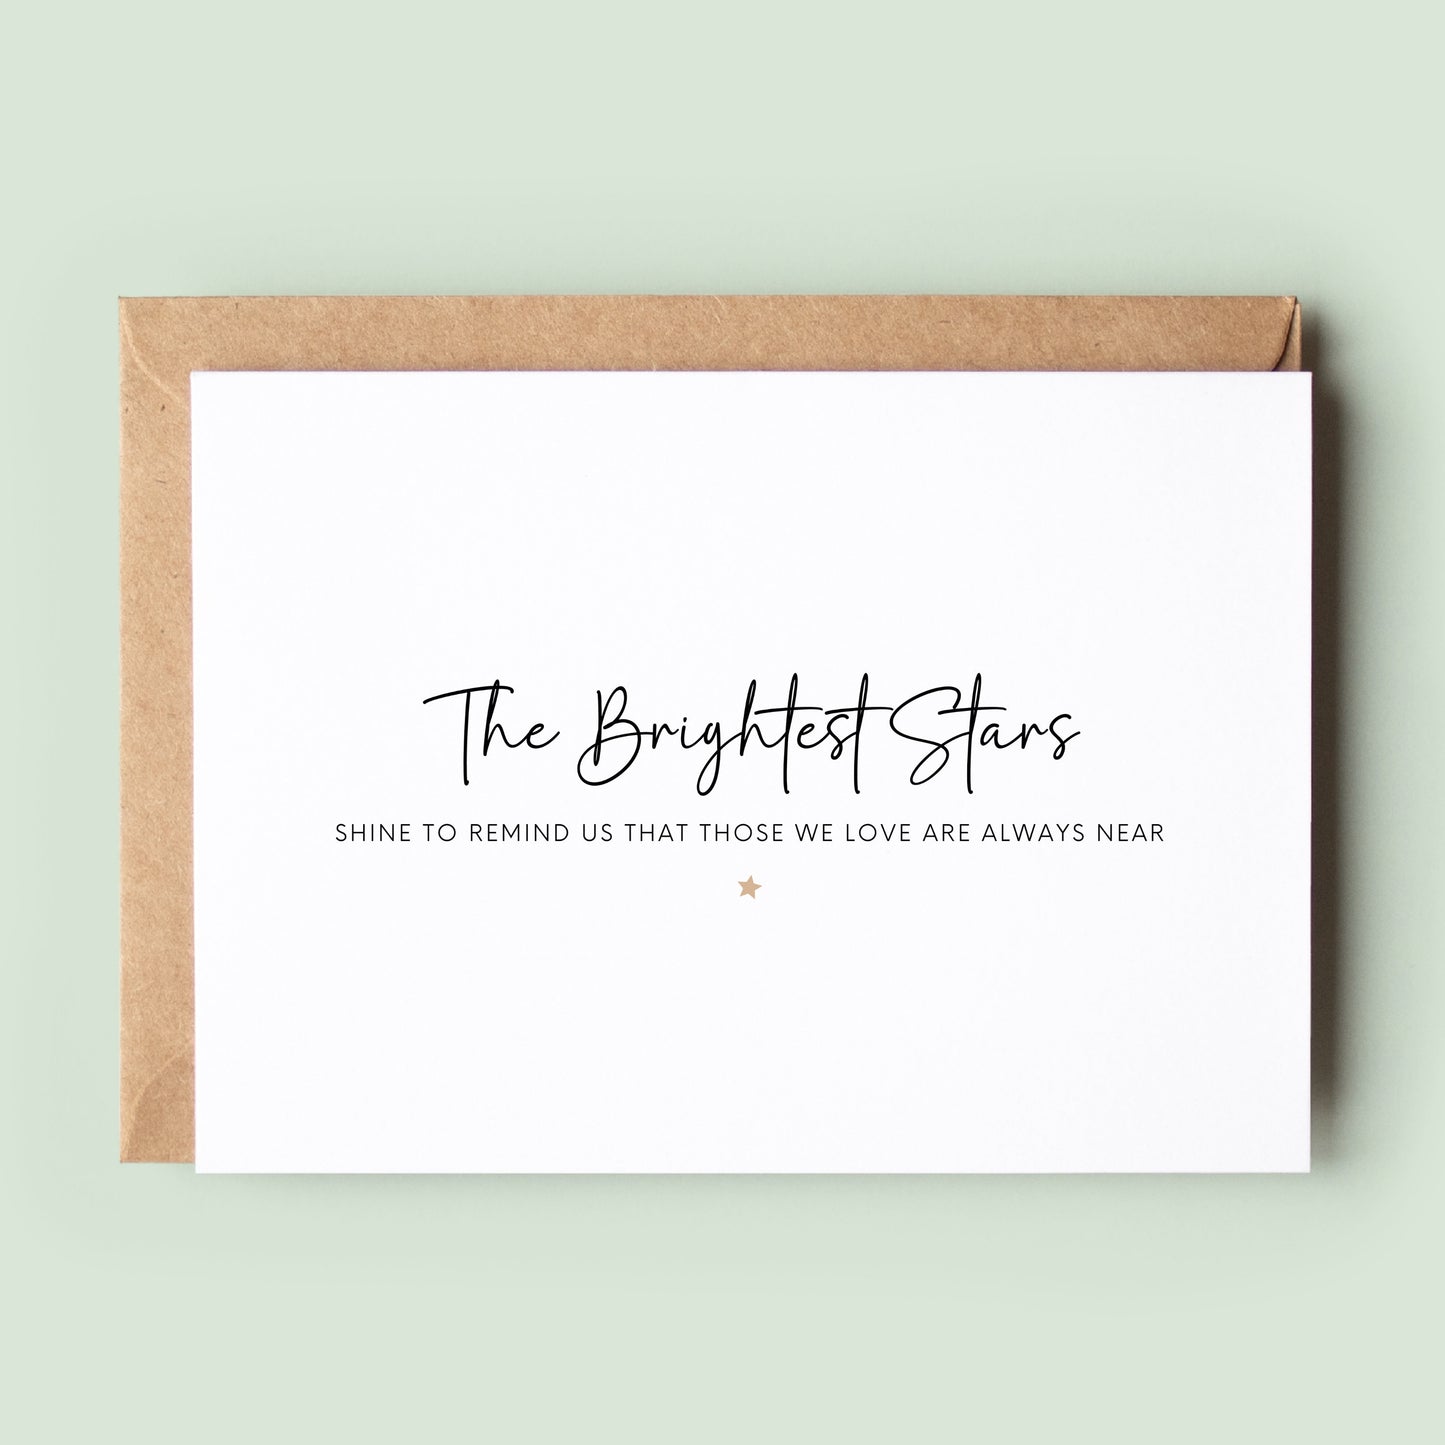 Brightest Stars Sympathy Greeting Card, Sympathy Card, Encouragement Card, Condolence Card, Bereavement Card, Thinking of You - #175